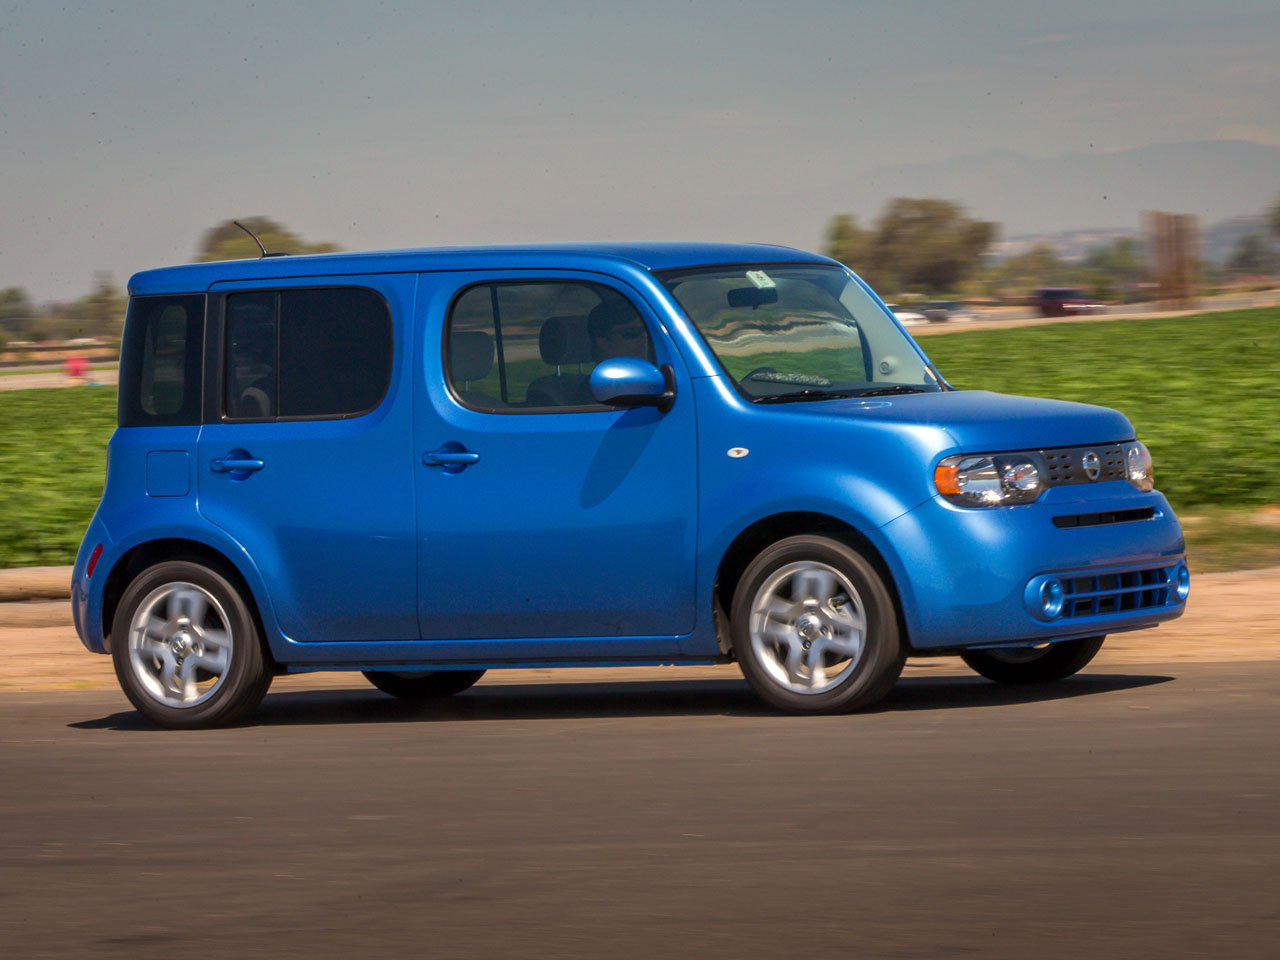 Nissan cube canadian price #6